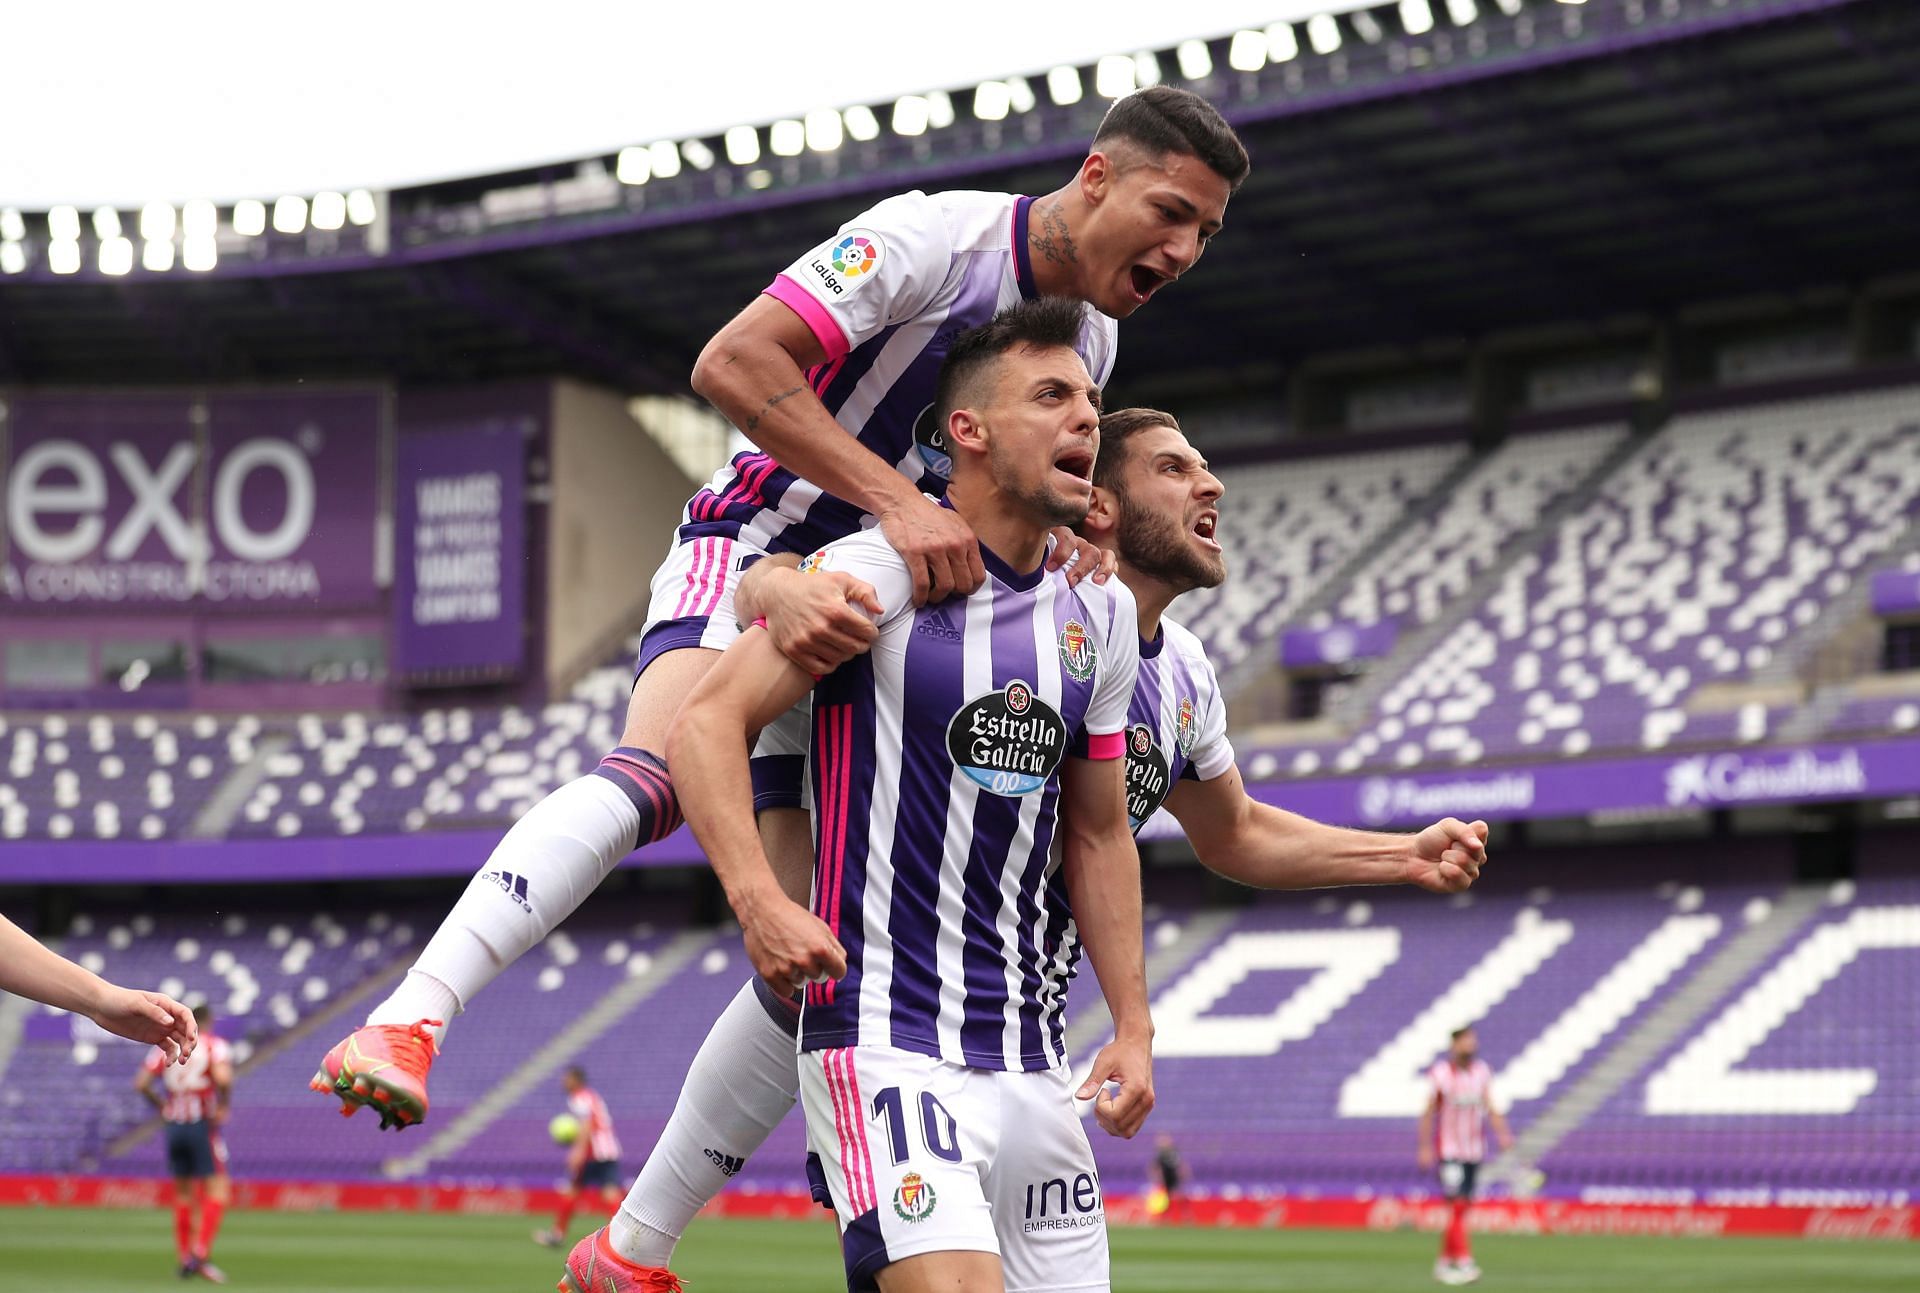 Real Valladolid will face Girona on Saturday